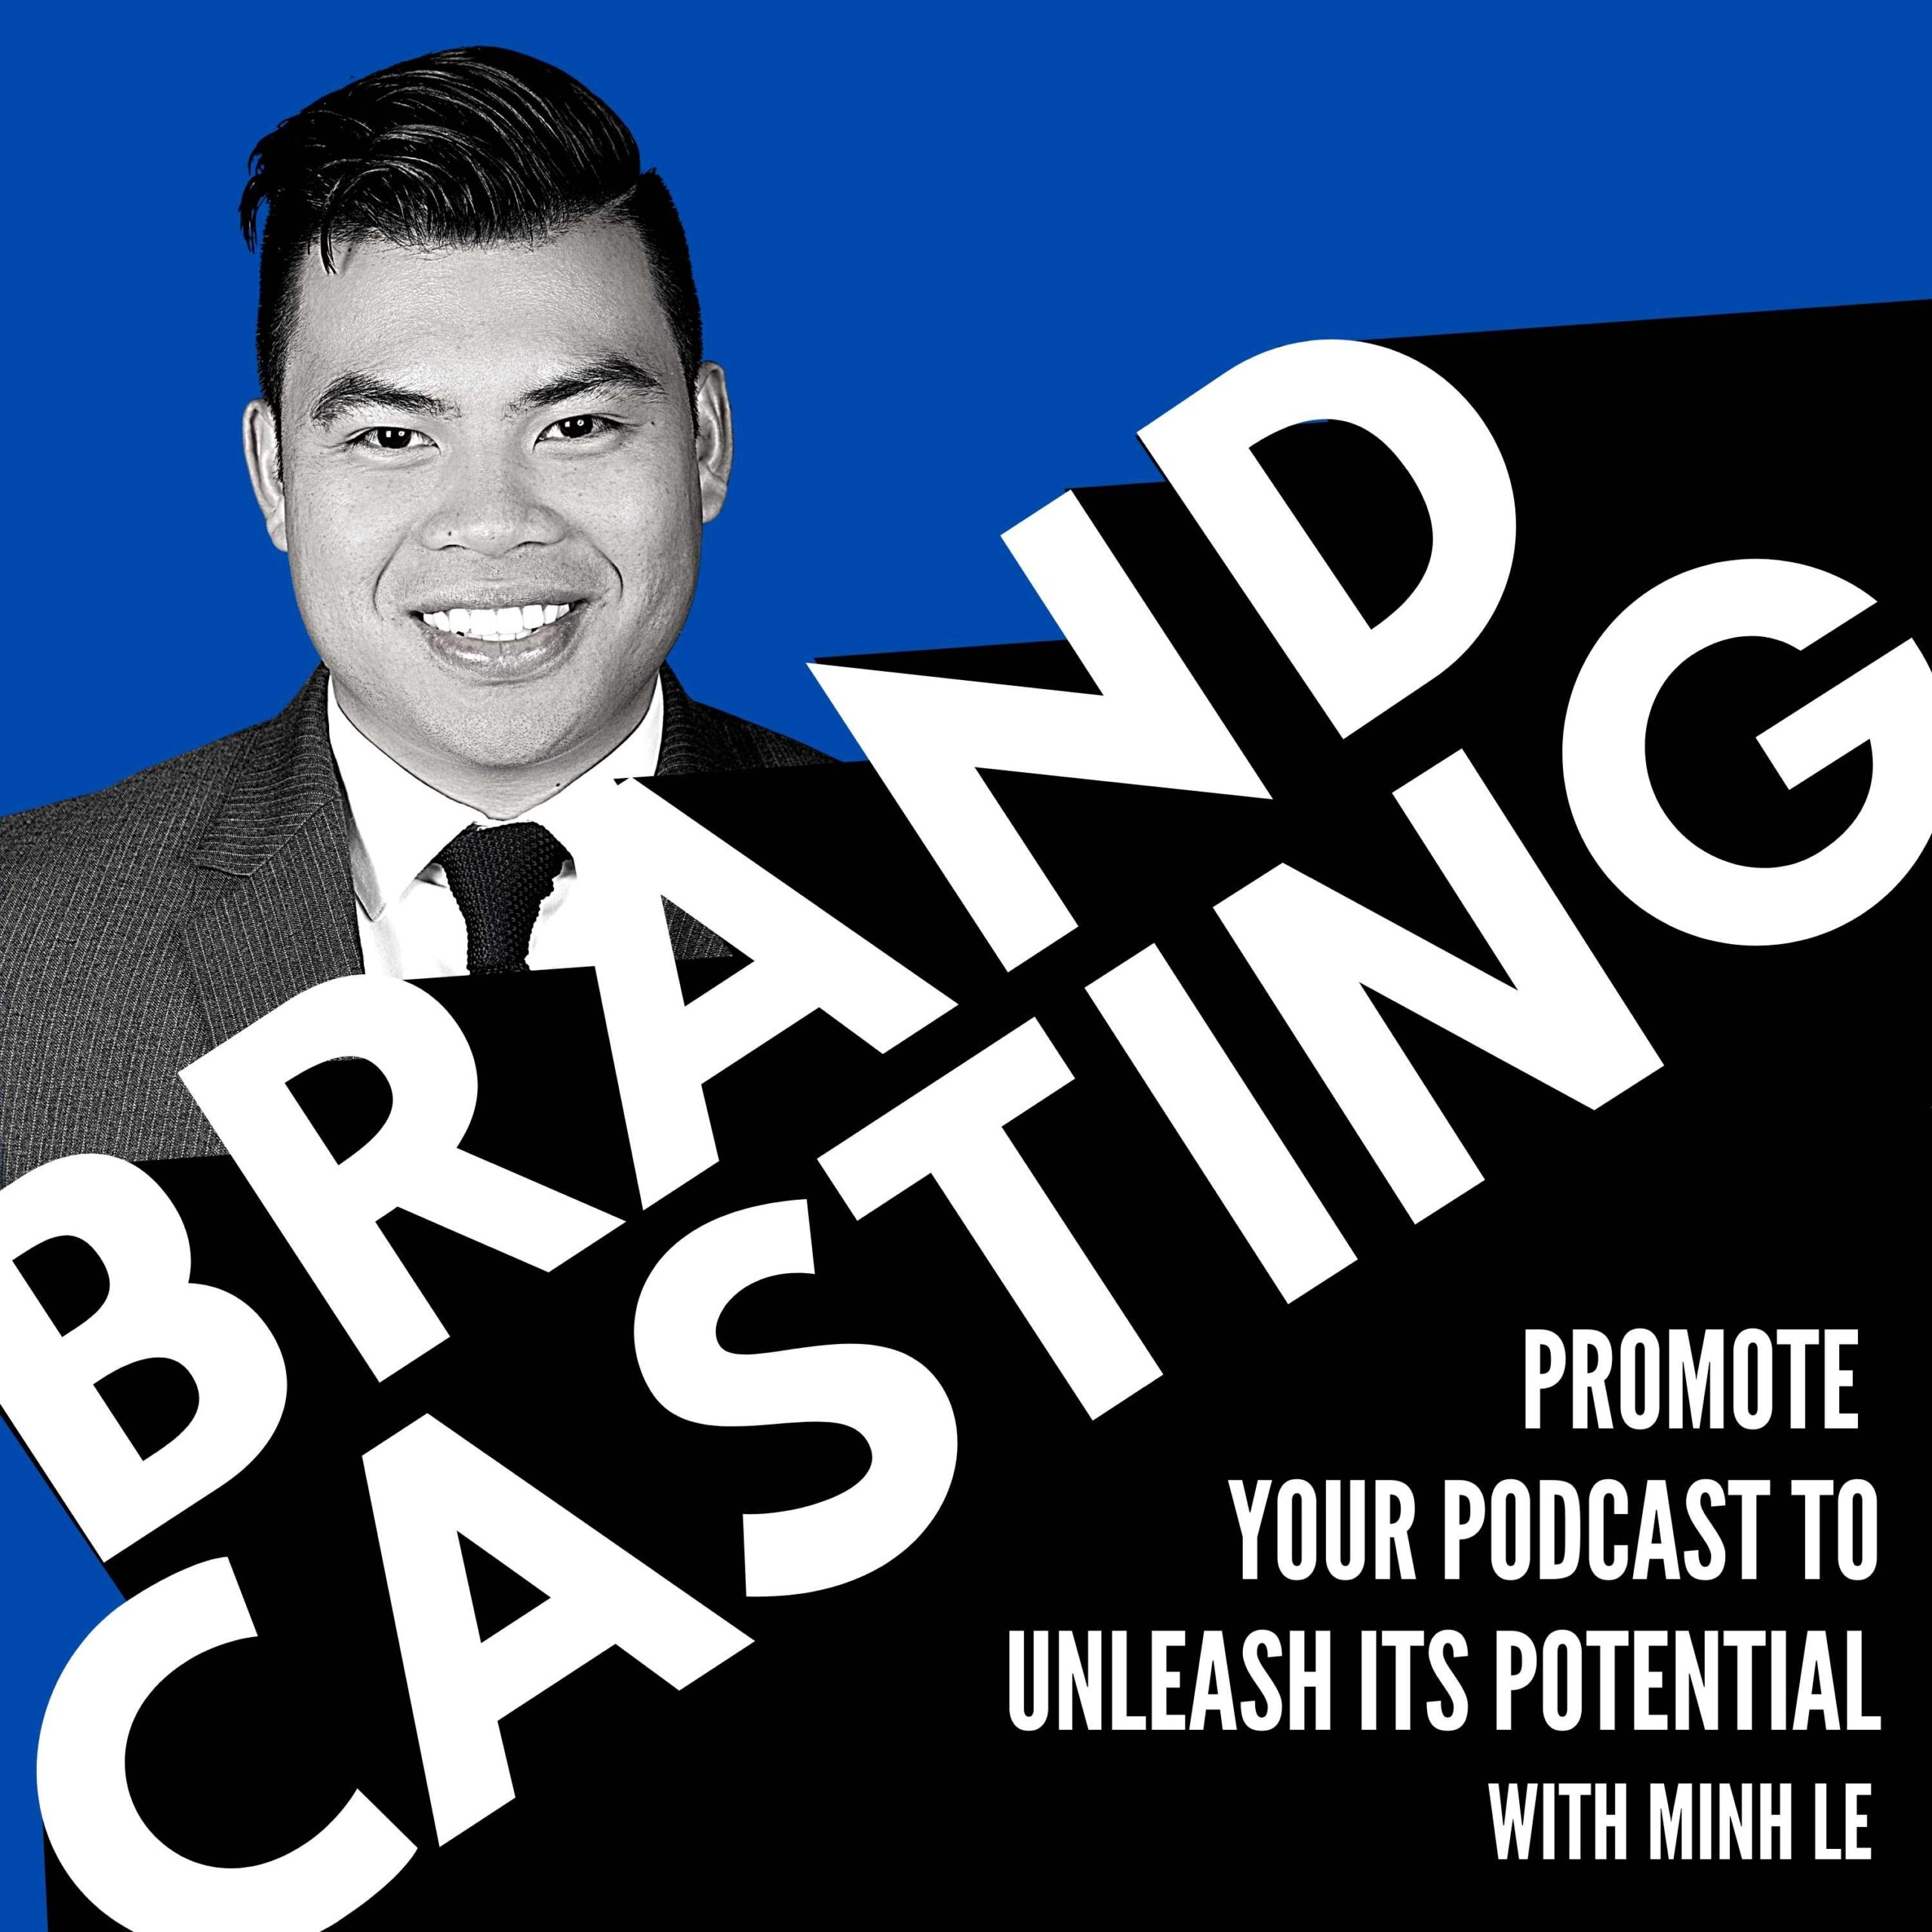 Brandcasting – Promote Your Podcast to Unleash Its Potential with Minh Le